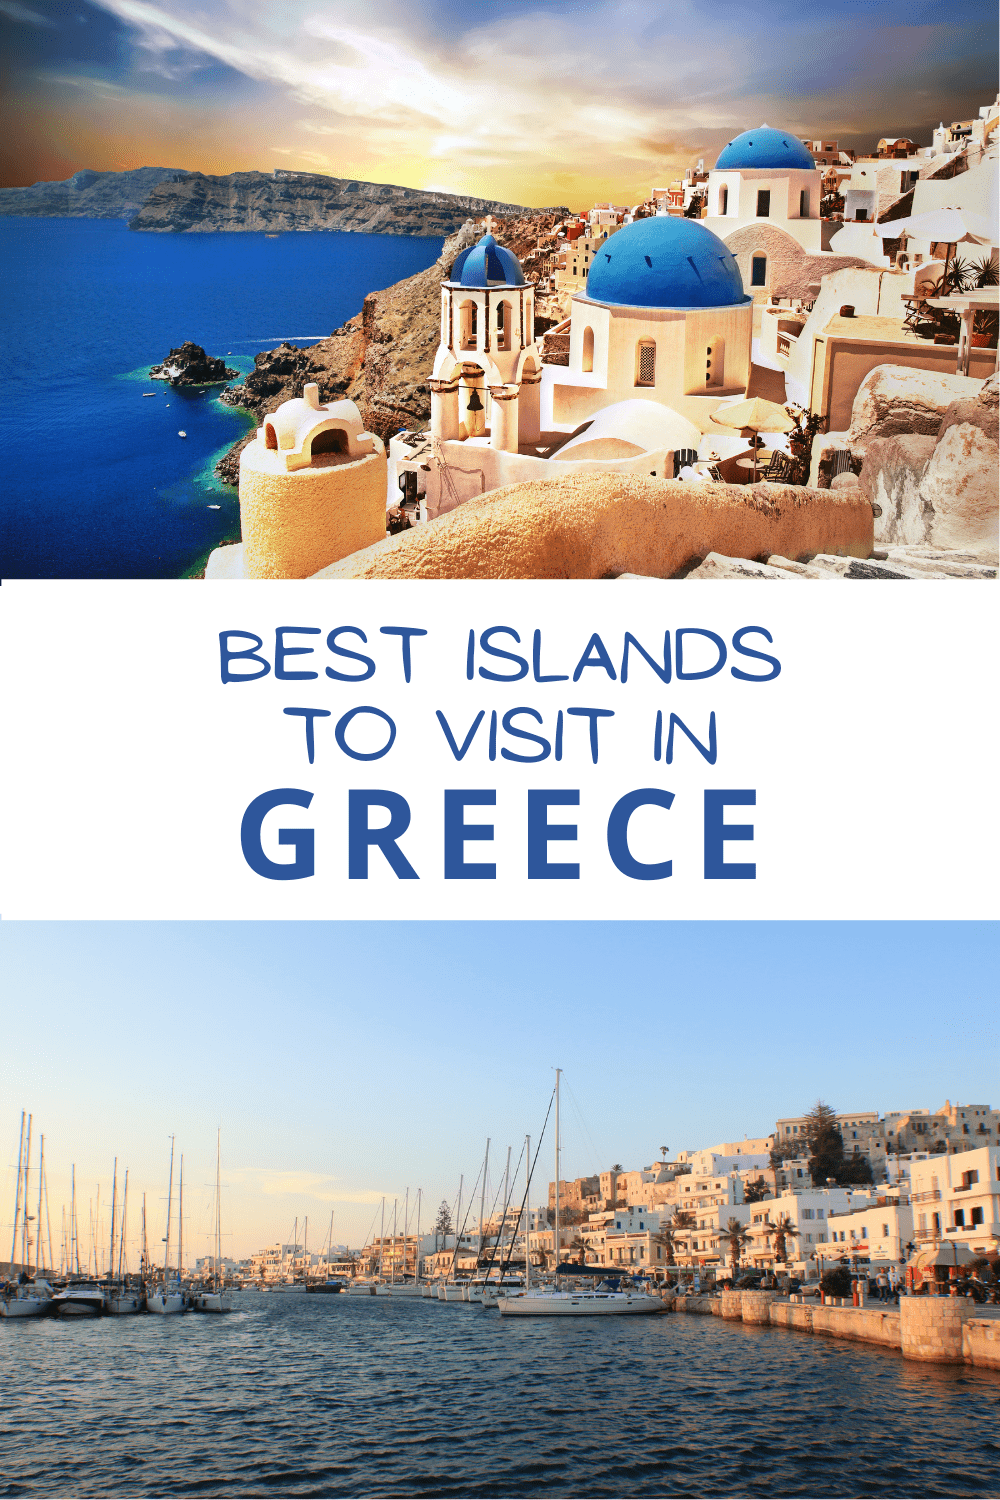 Top: Blue domes of Santorini at sunset. Bottom: boats along the waterfront of an old Greek village. Text overlay says "best islands to visit in Greece"